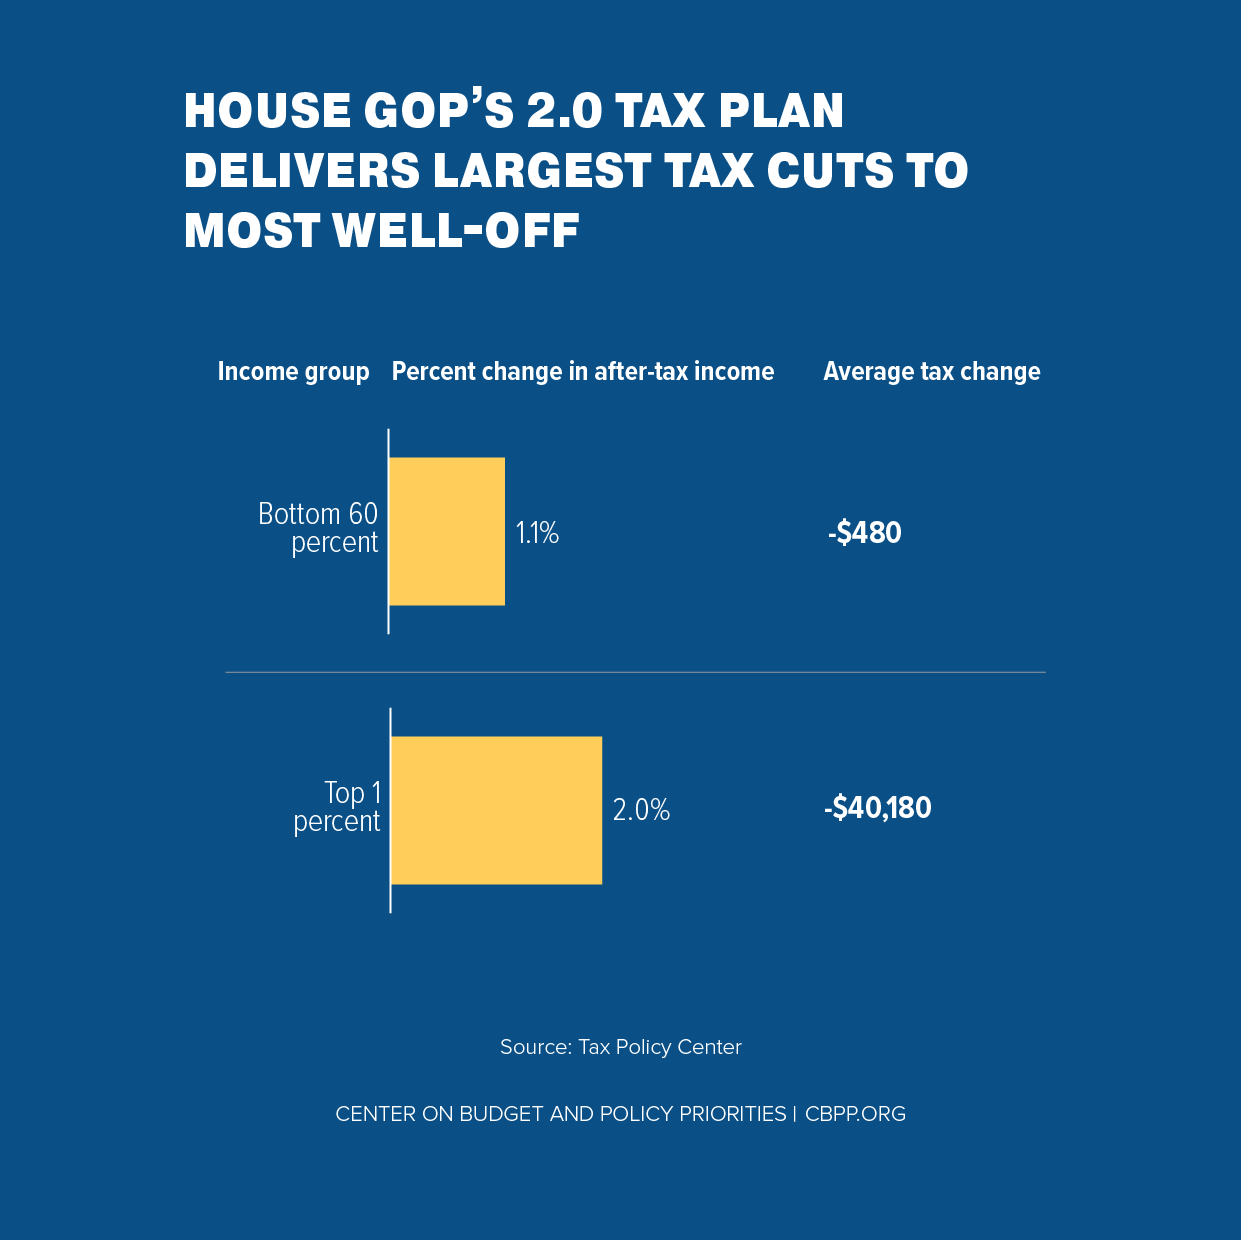 House GOP's 2.0 Tax Plan Delivers Largest Tax Cuts to Most Well-Off